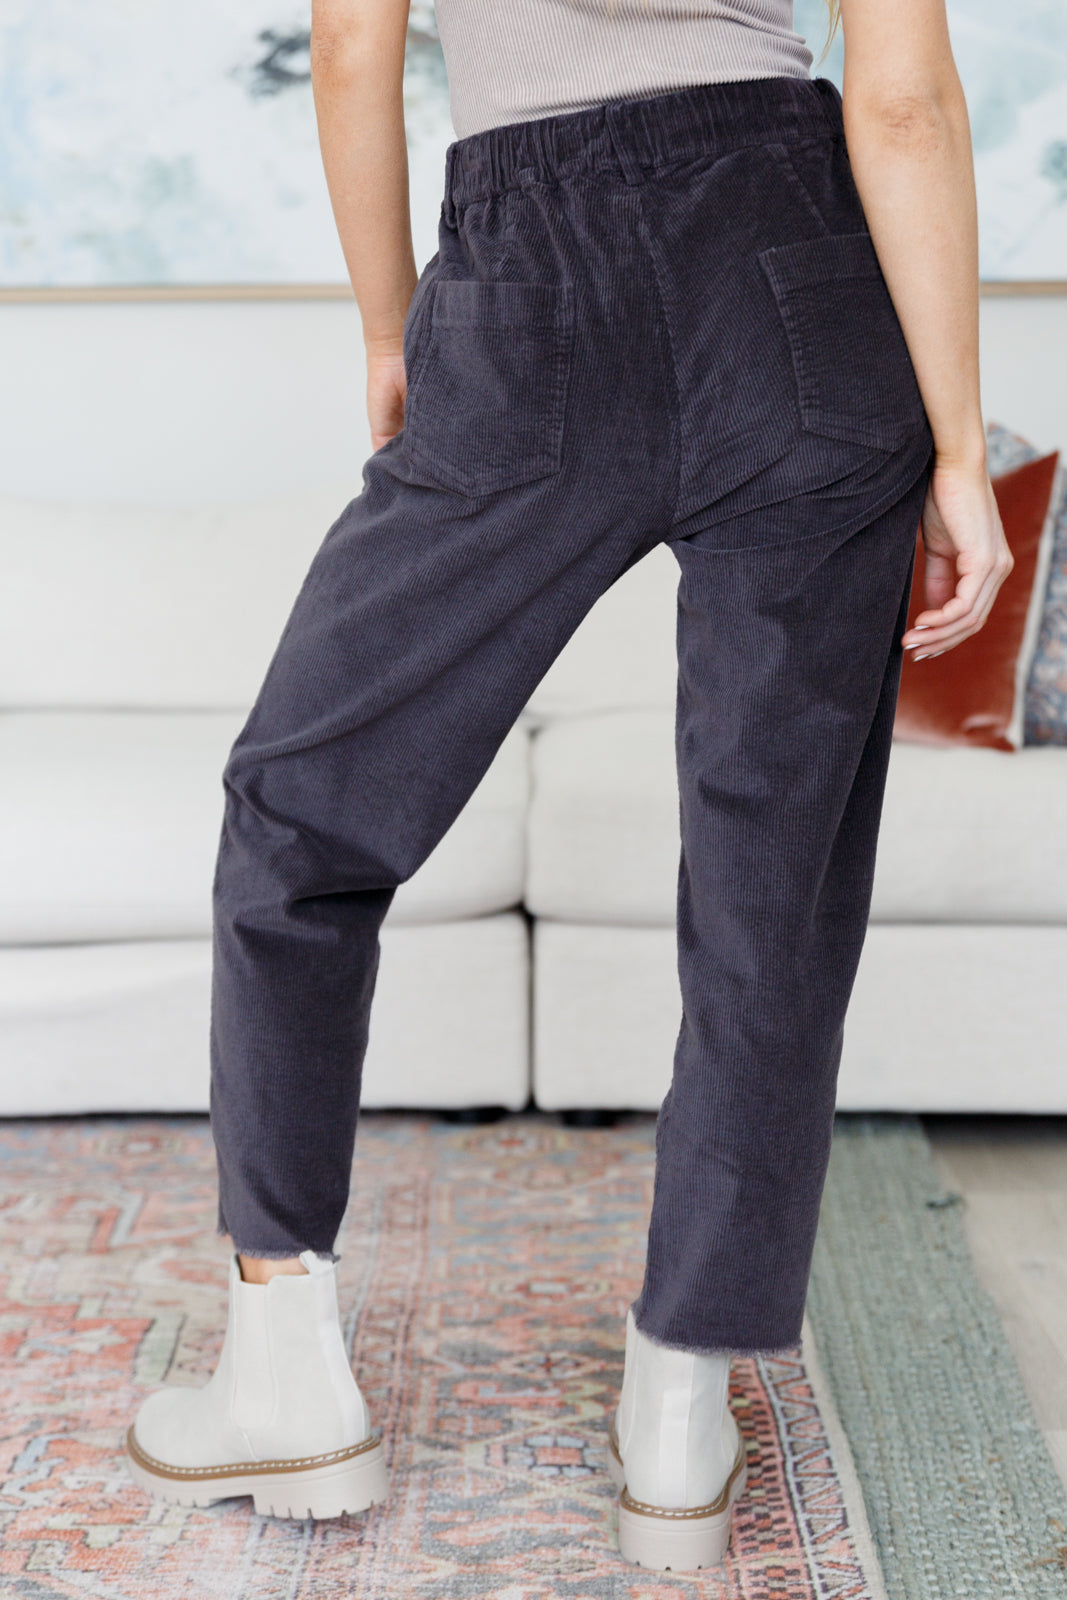 Less Confused Corduroy Pants Womens Ave Shops   